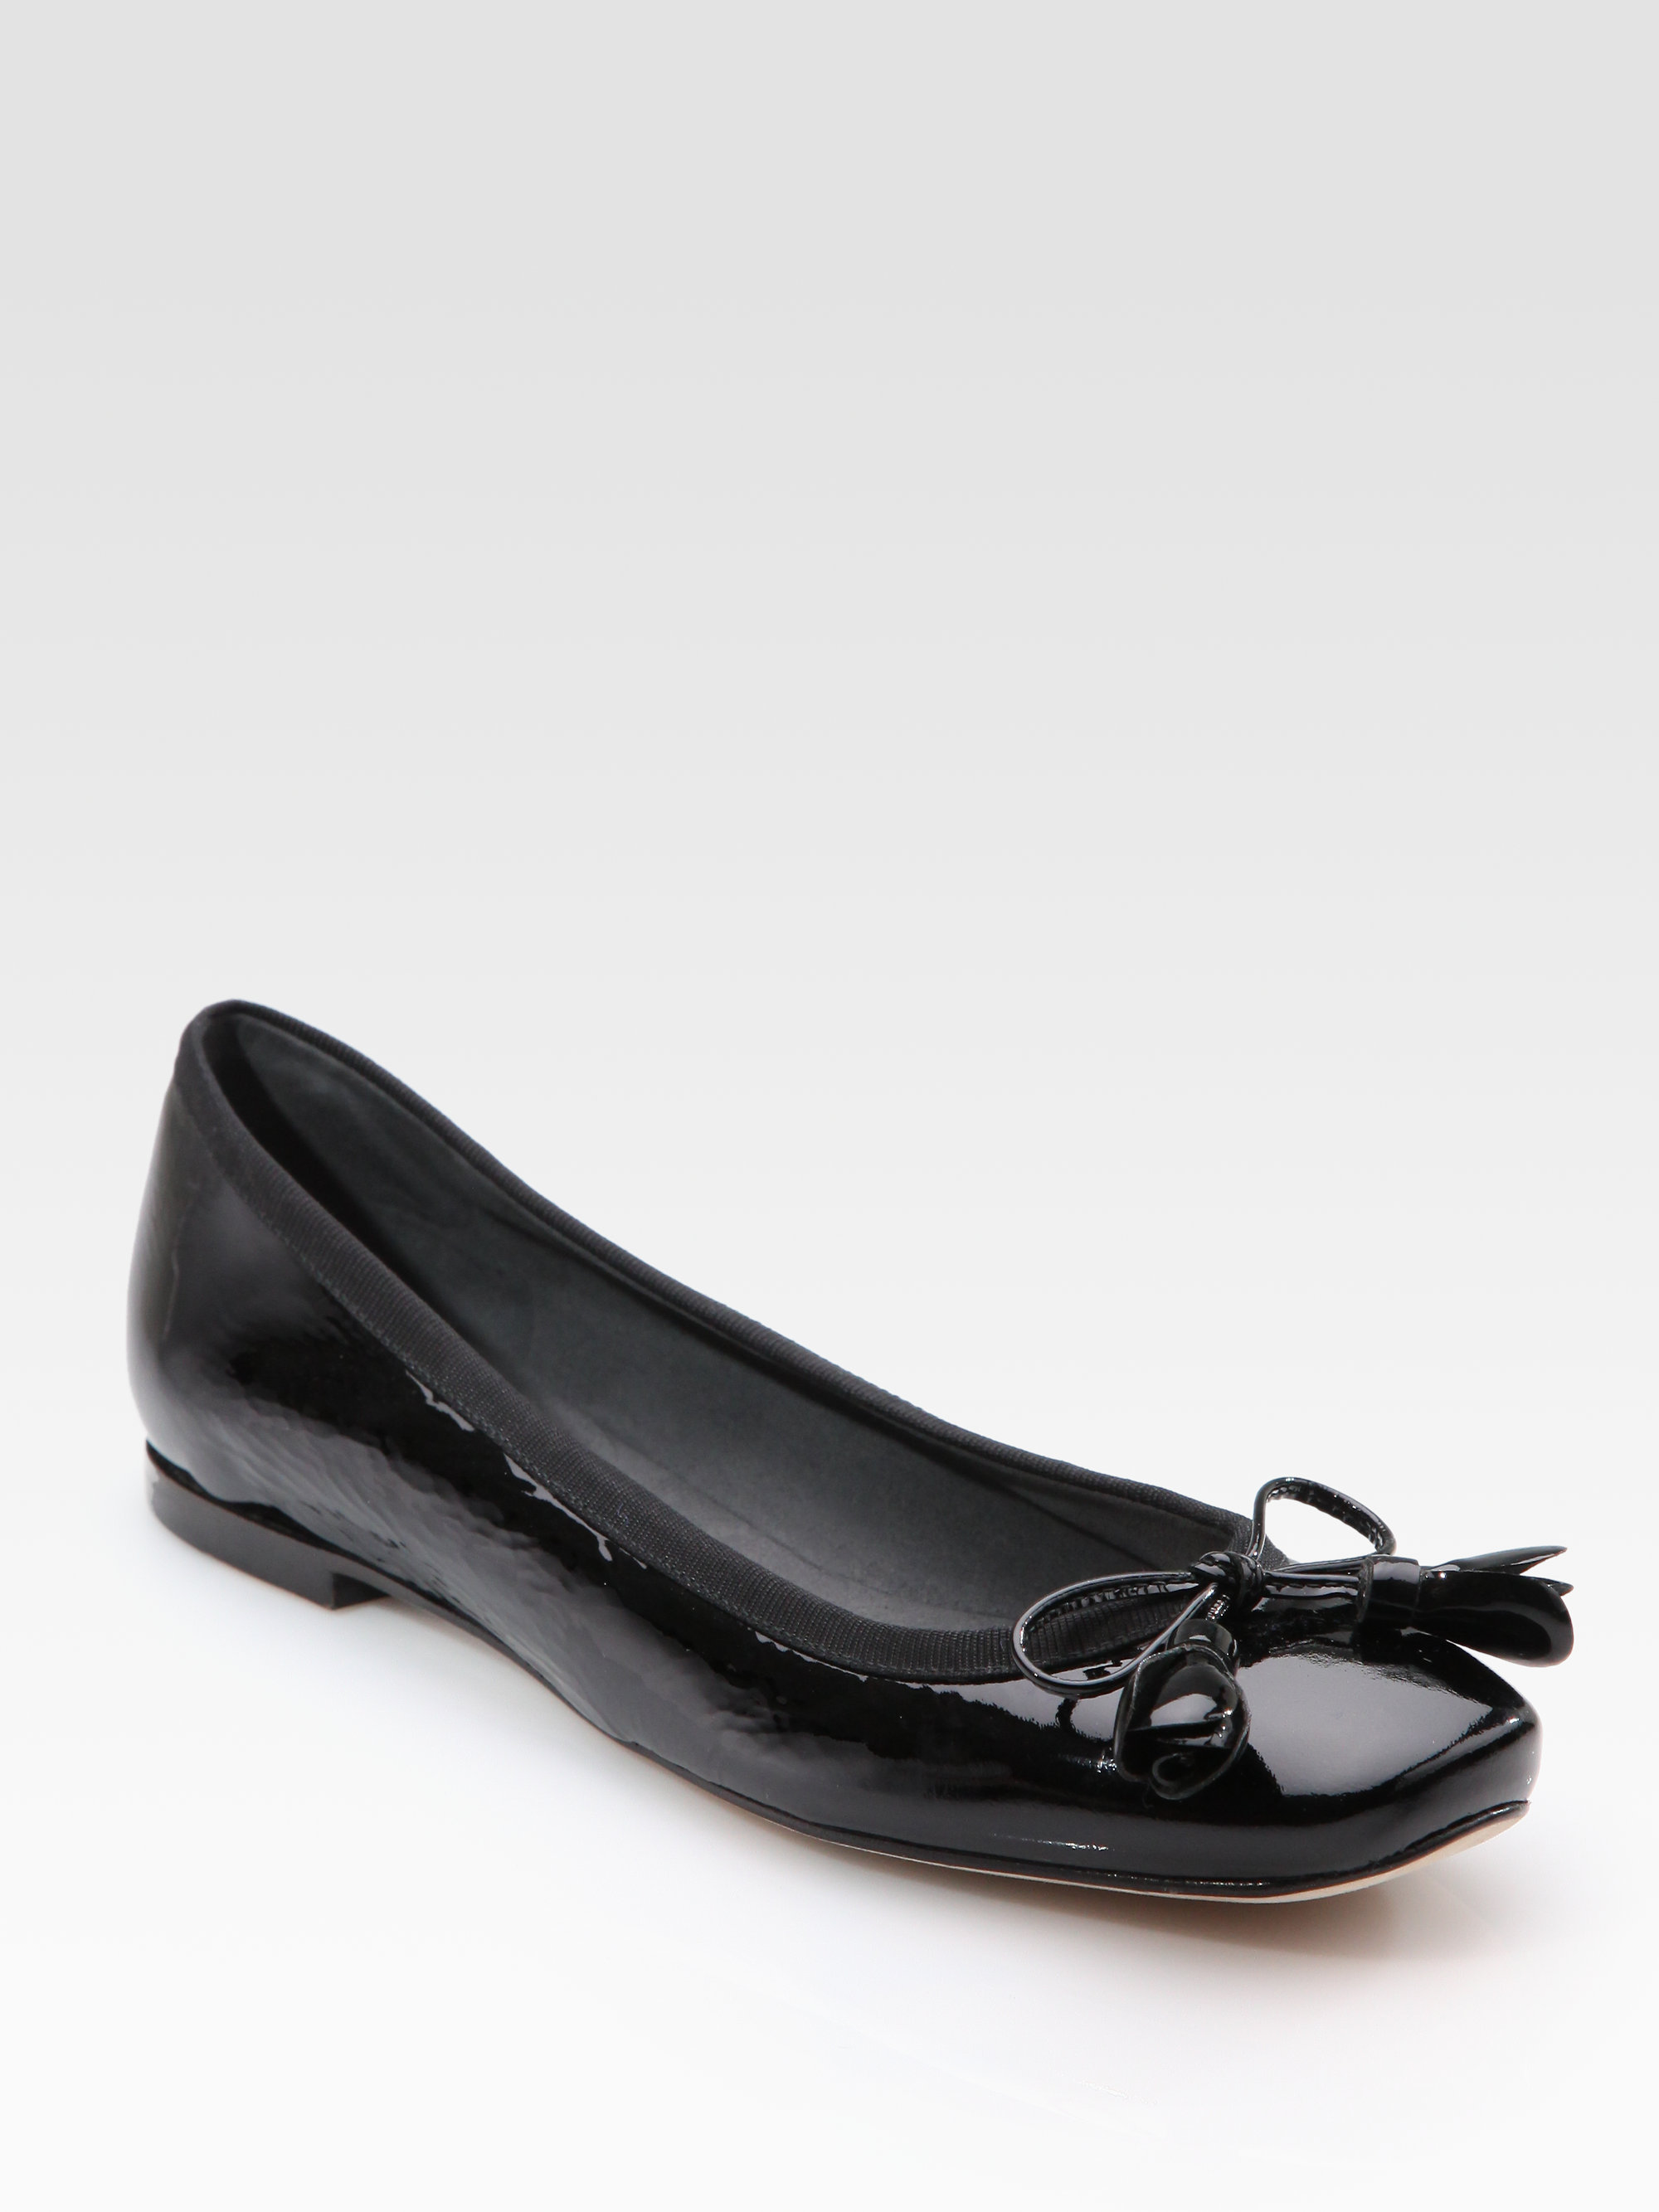 patent leather flats with bow